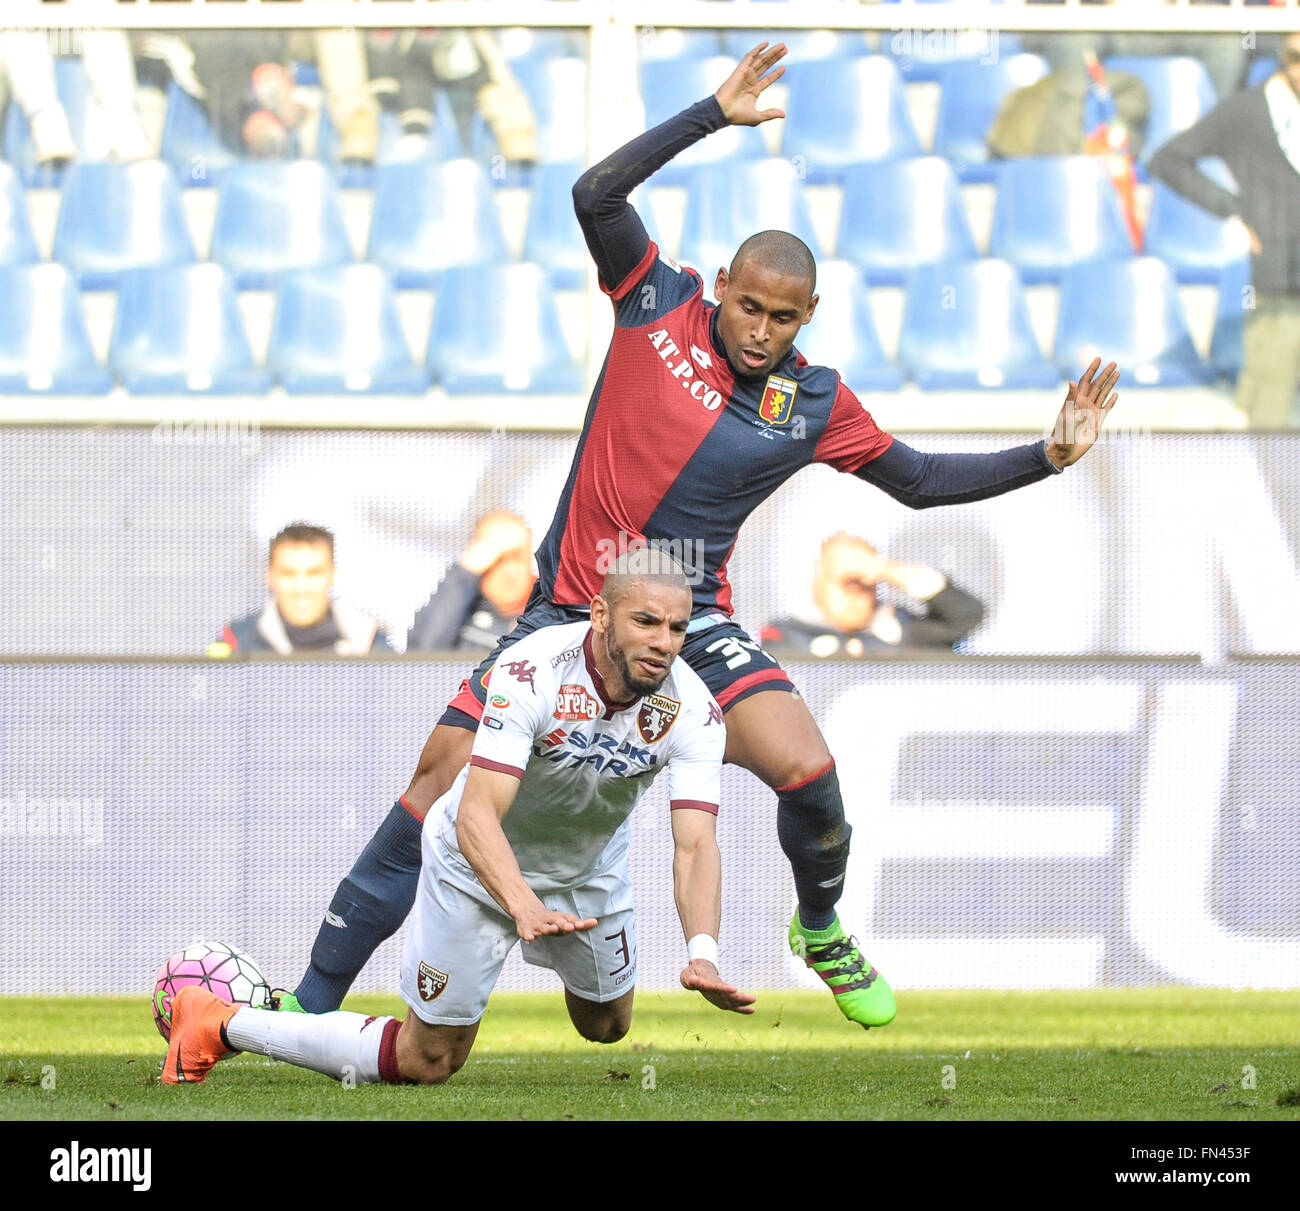 Genoa, Italy. 13th Mar, 2016. Gabriel Silva (right) and Bruno Peres compete for the ball during the Serie A football match between Genoa CFC and Torino FC. Genoa CFC wins 3-2 over Torino FC. © Nicolò Campo/Pacific Press/Alamy Live News Stock Photo